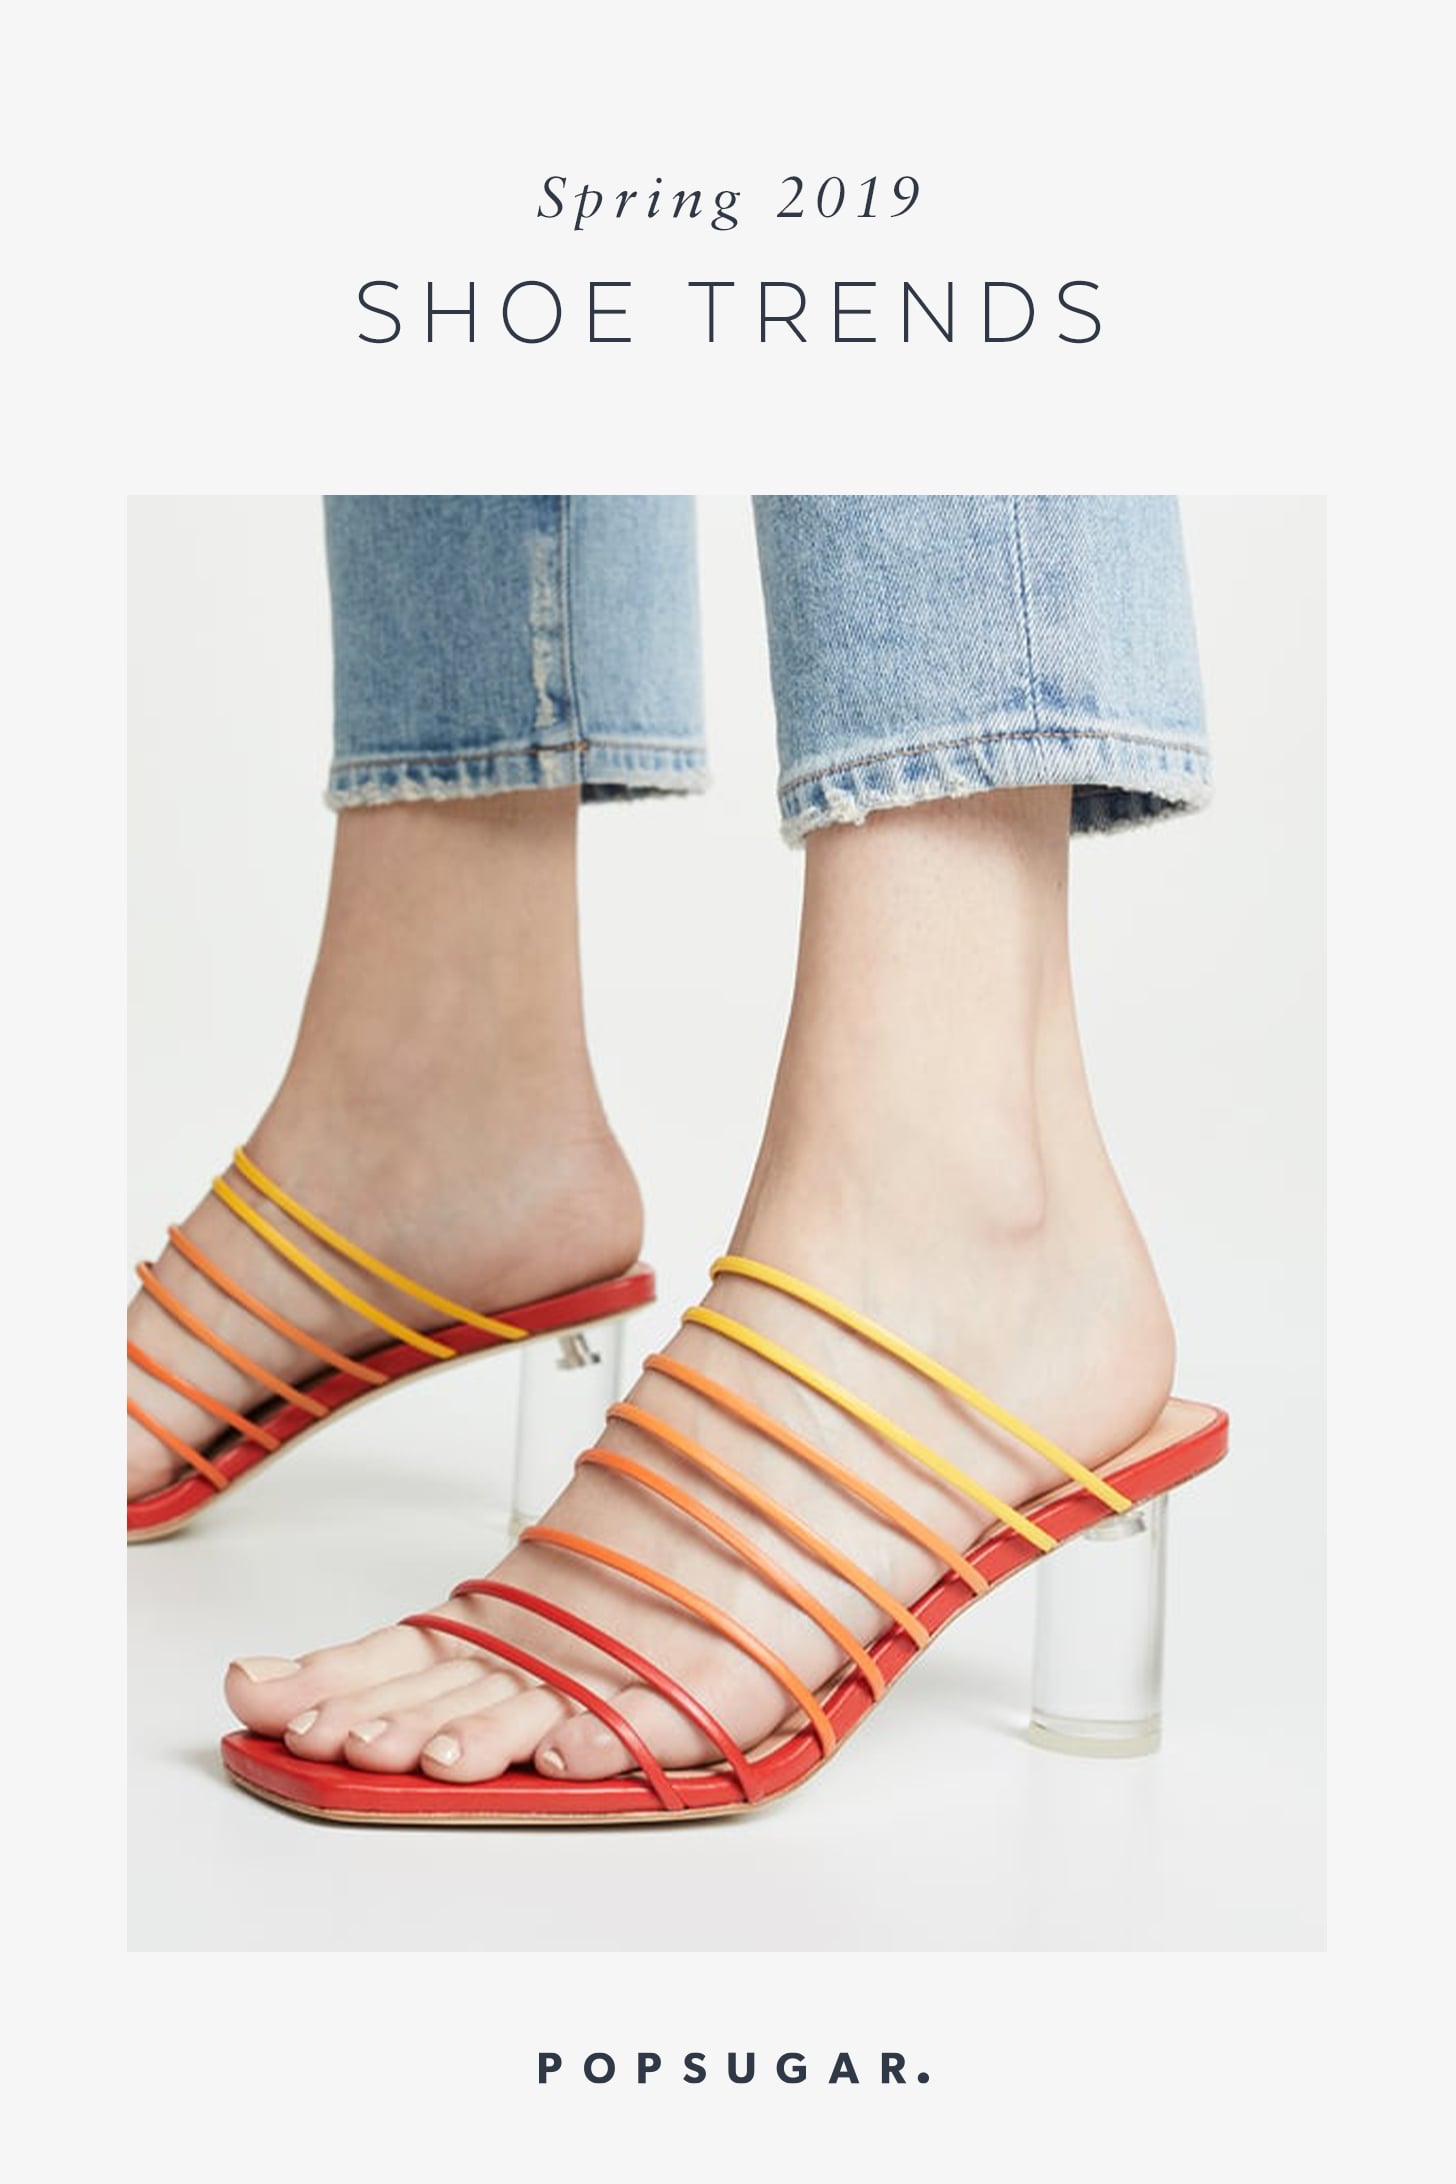 hot shoes for spring 2019